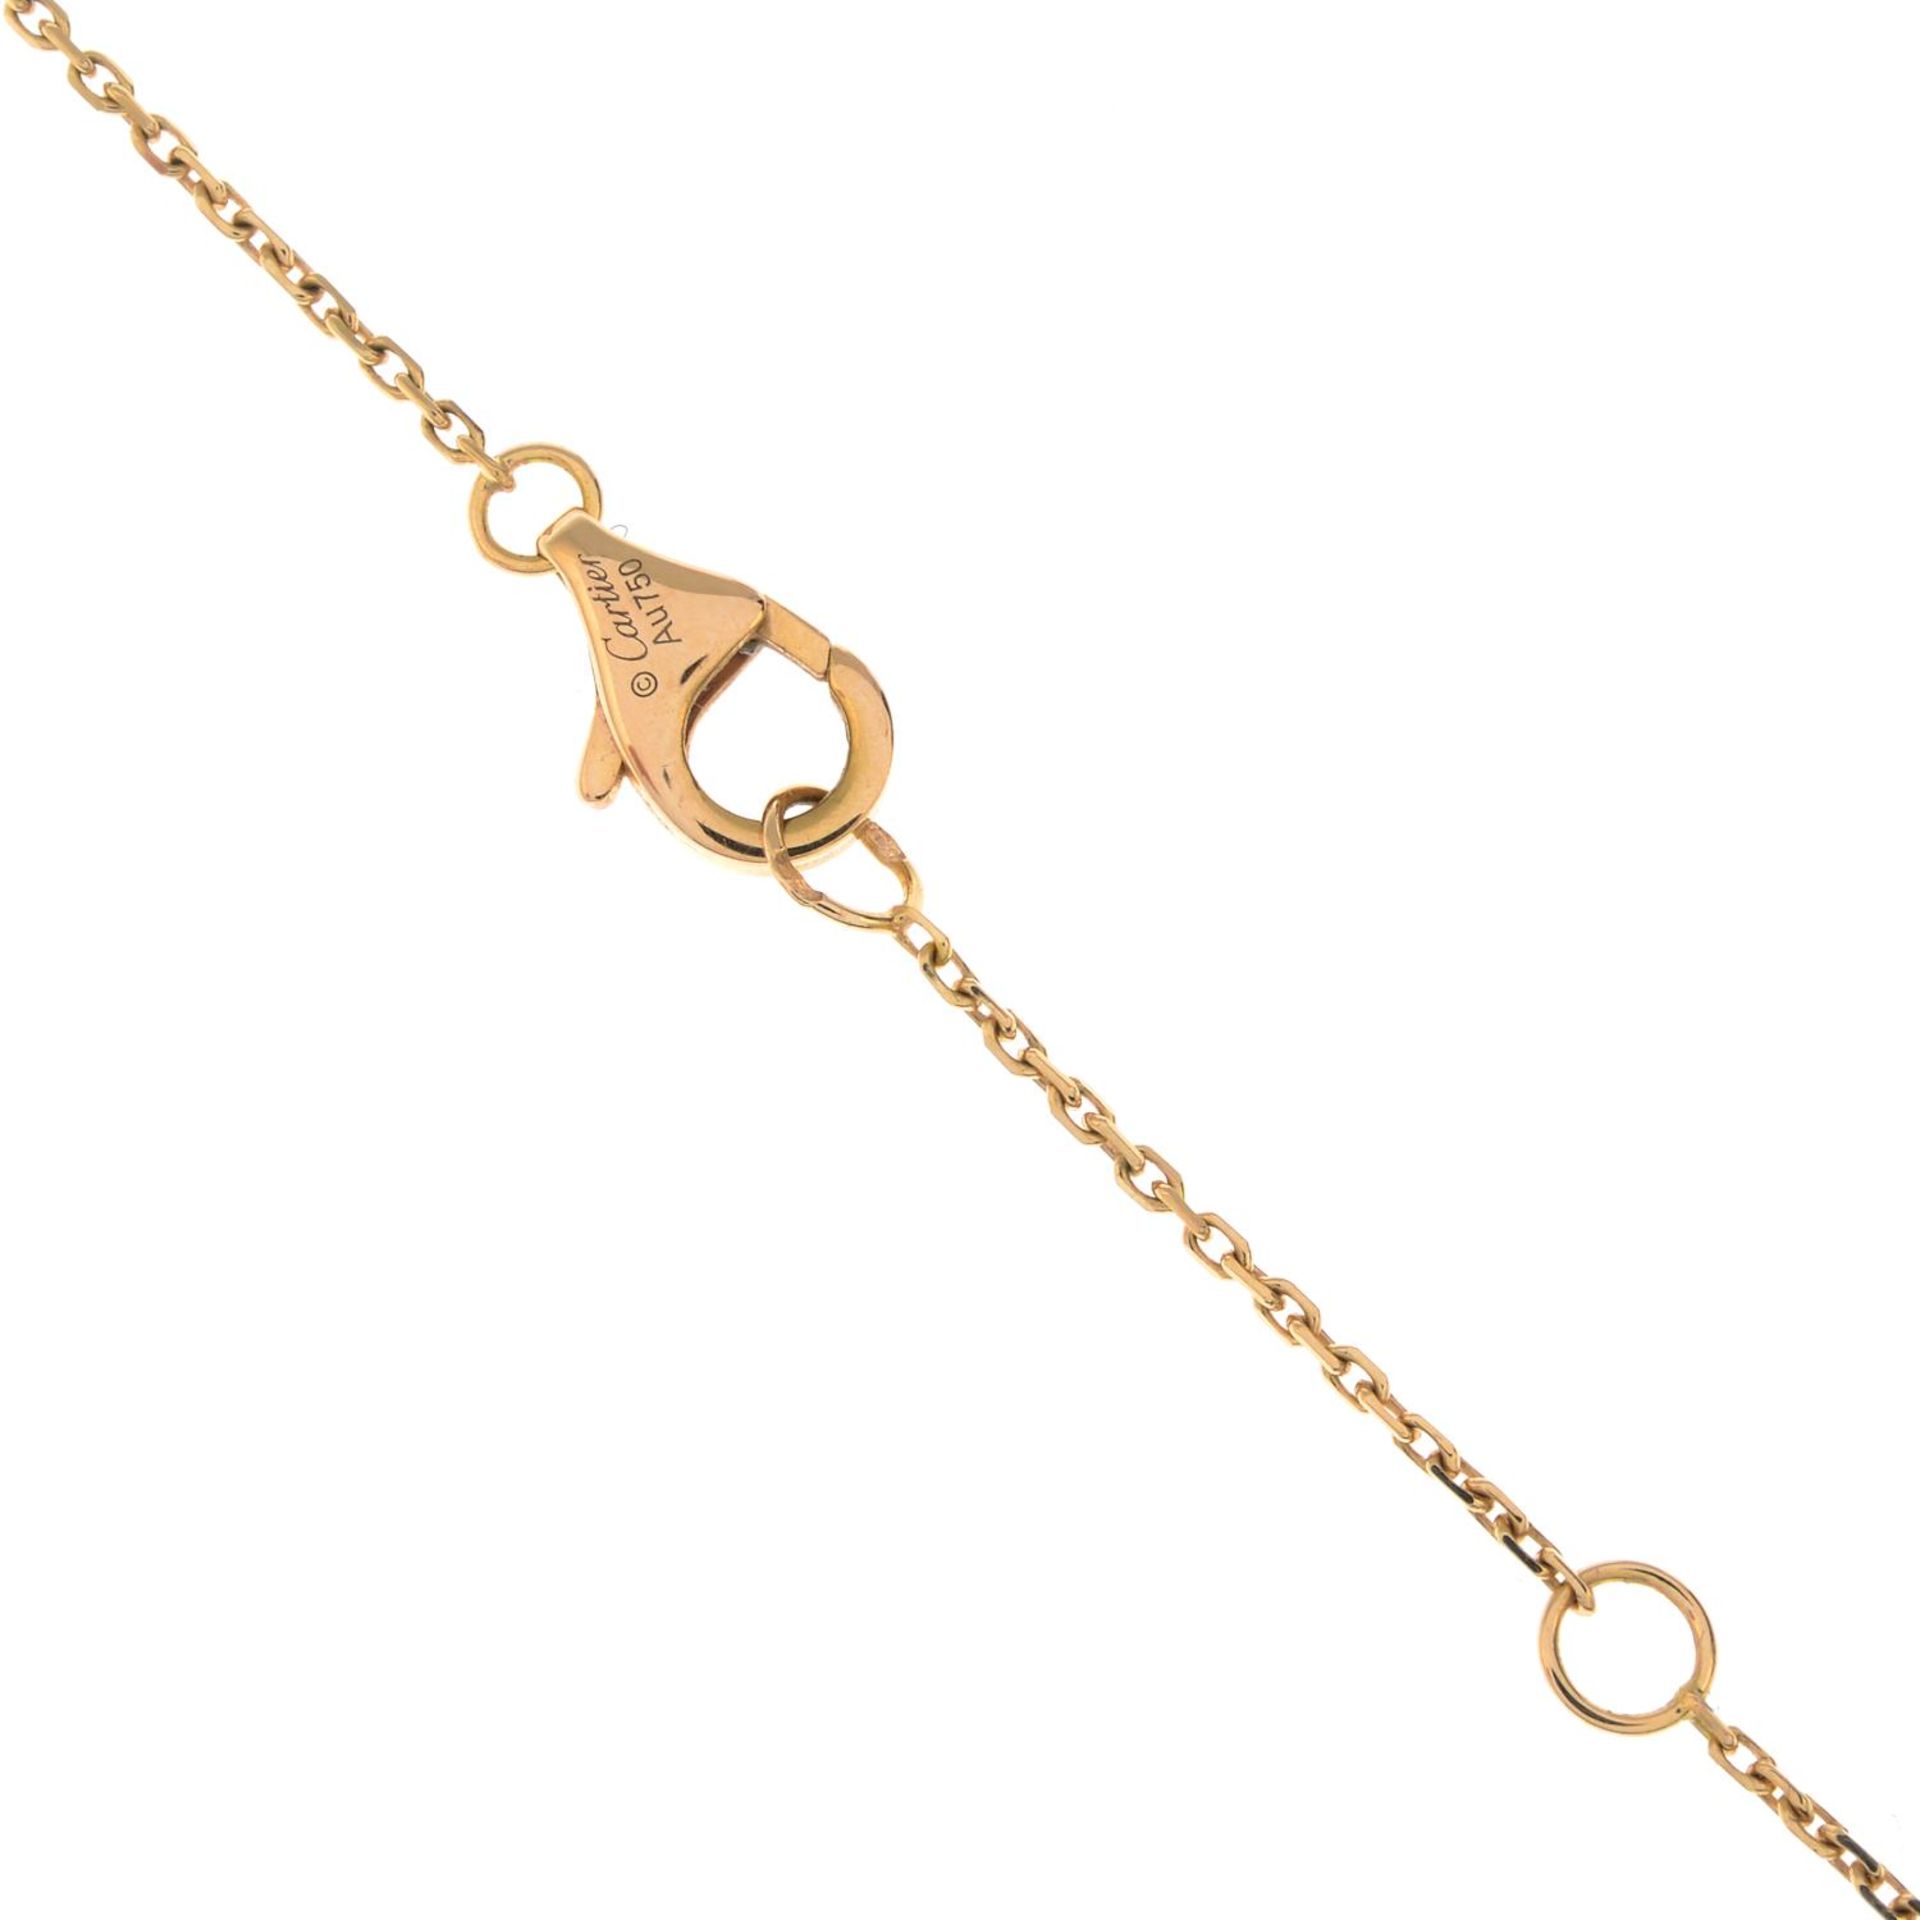 CARTIER - an 18ct gold diamond 'Trinity' pendant, on chain. - Image 3 of 4